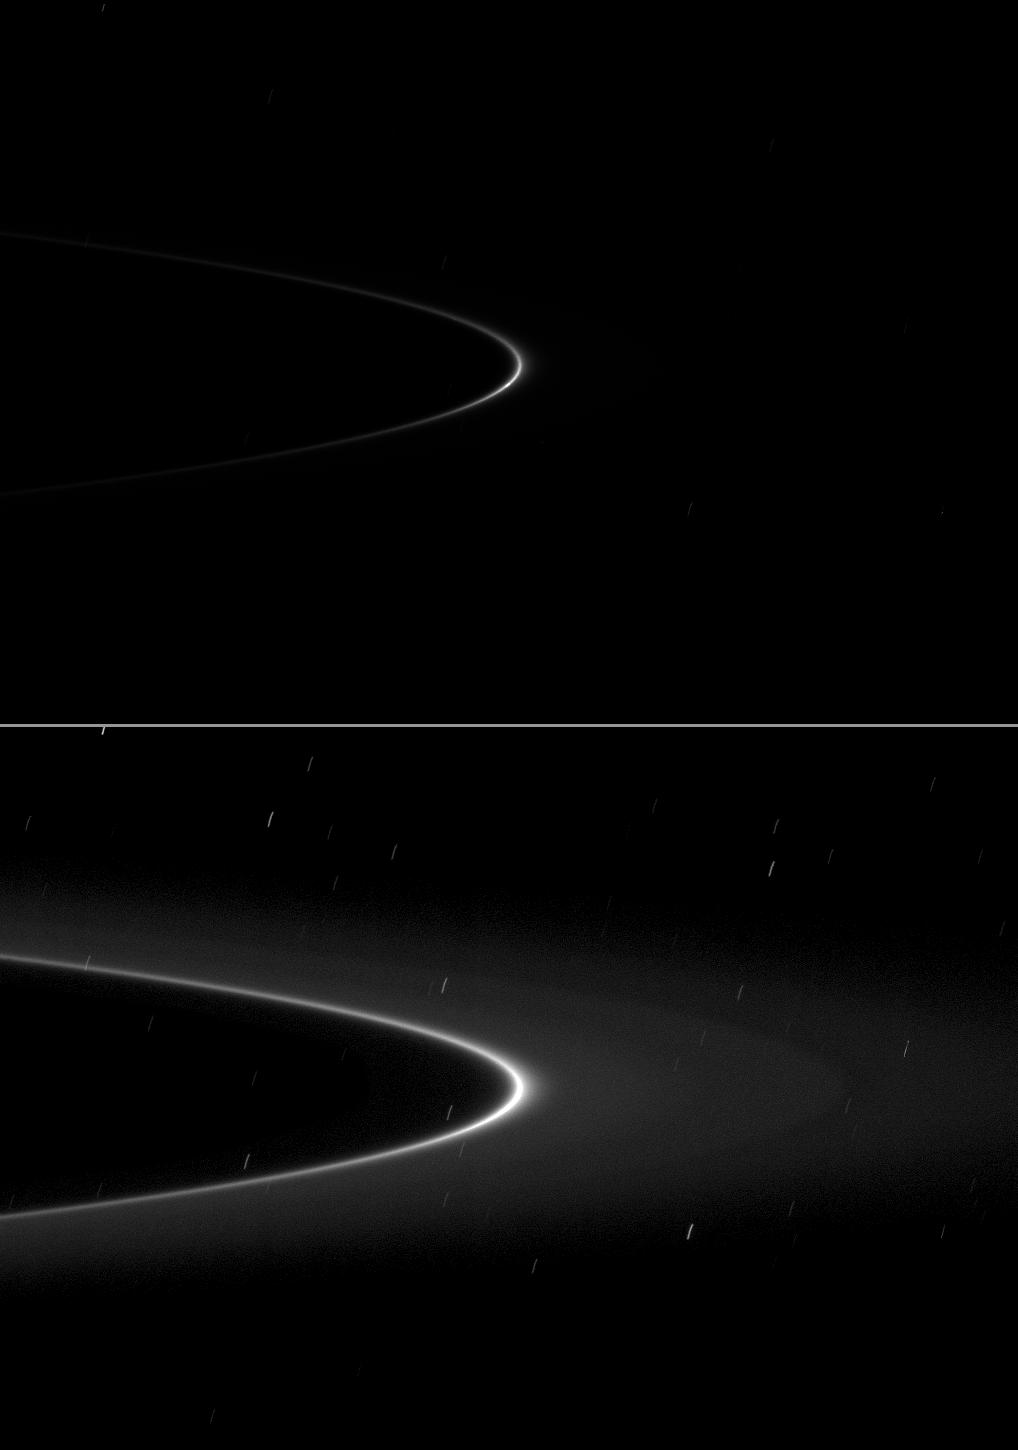 A small moonlet is just visible as a short streak near the ansa of the G ring arc in the top of two versions of the same image.